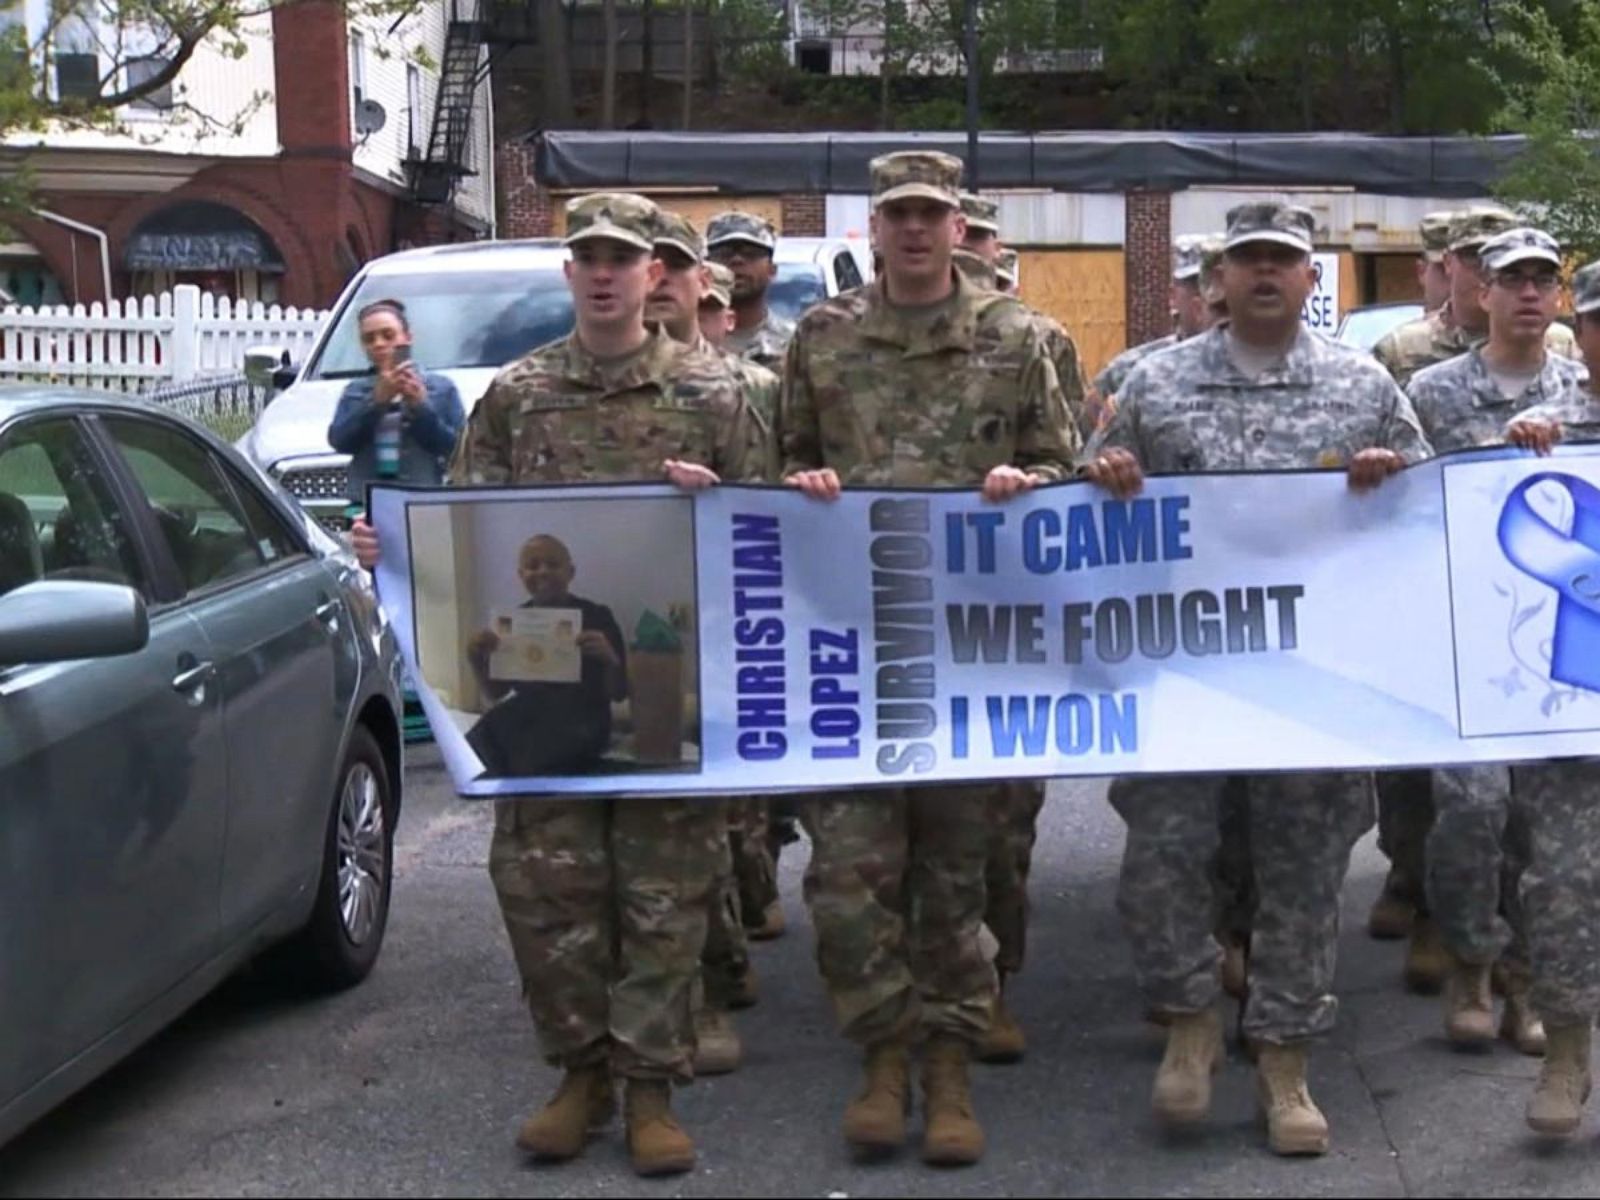 David Muir Reports: US Army Salutes Teen Who Fought Stage 4 Cancer